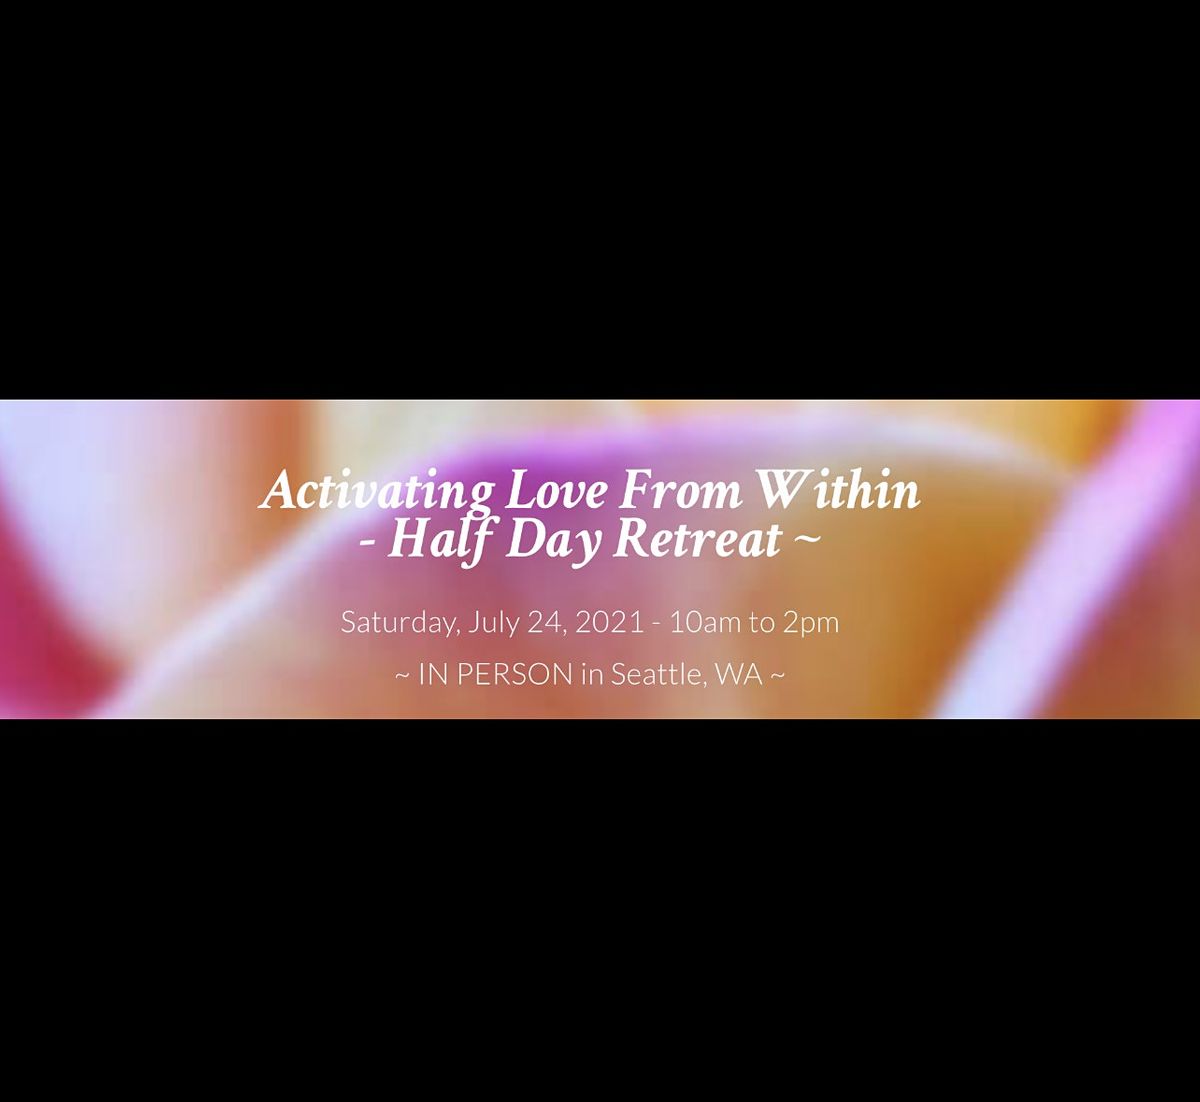 Activating Love from Within - Half Day Retreat